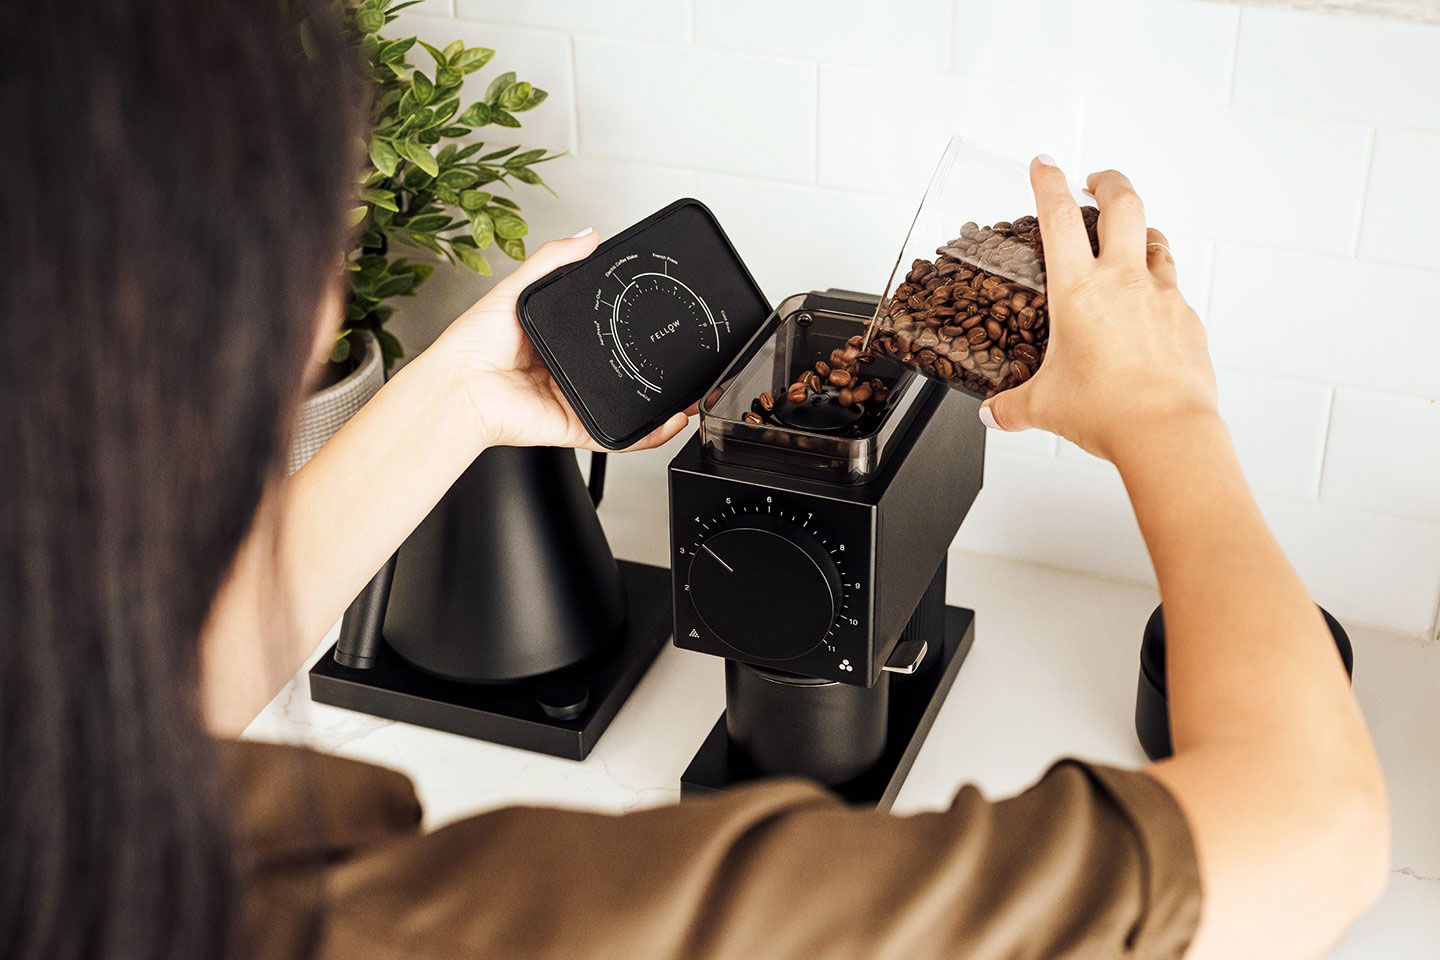 Fellow Ode Coffee Grinder Review 2020